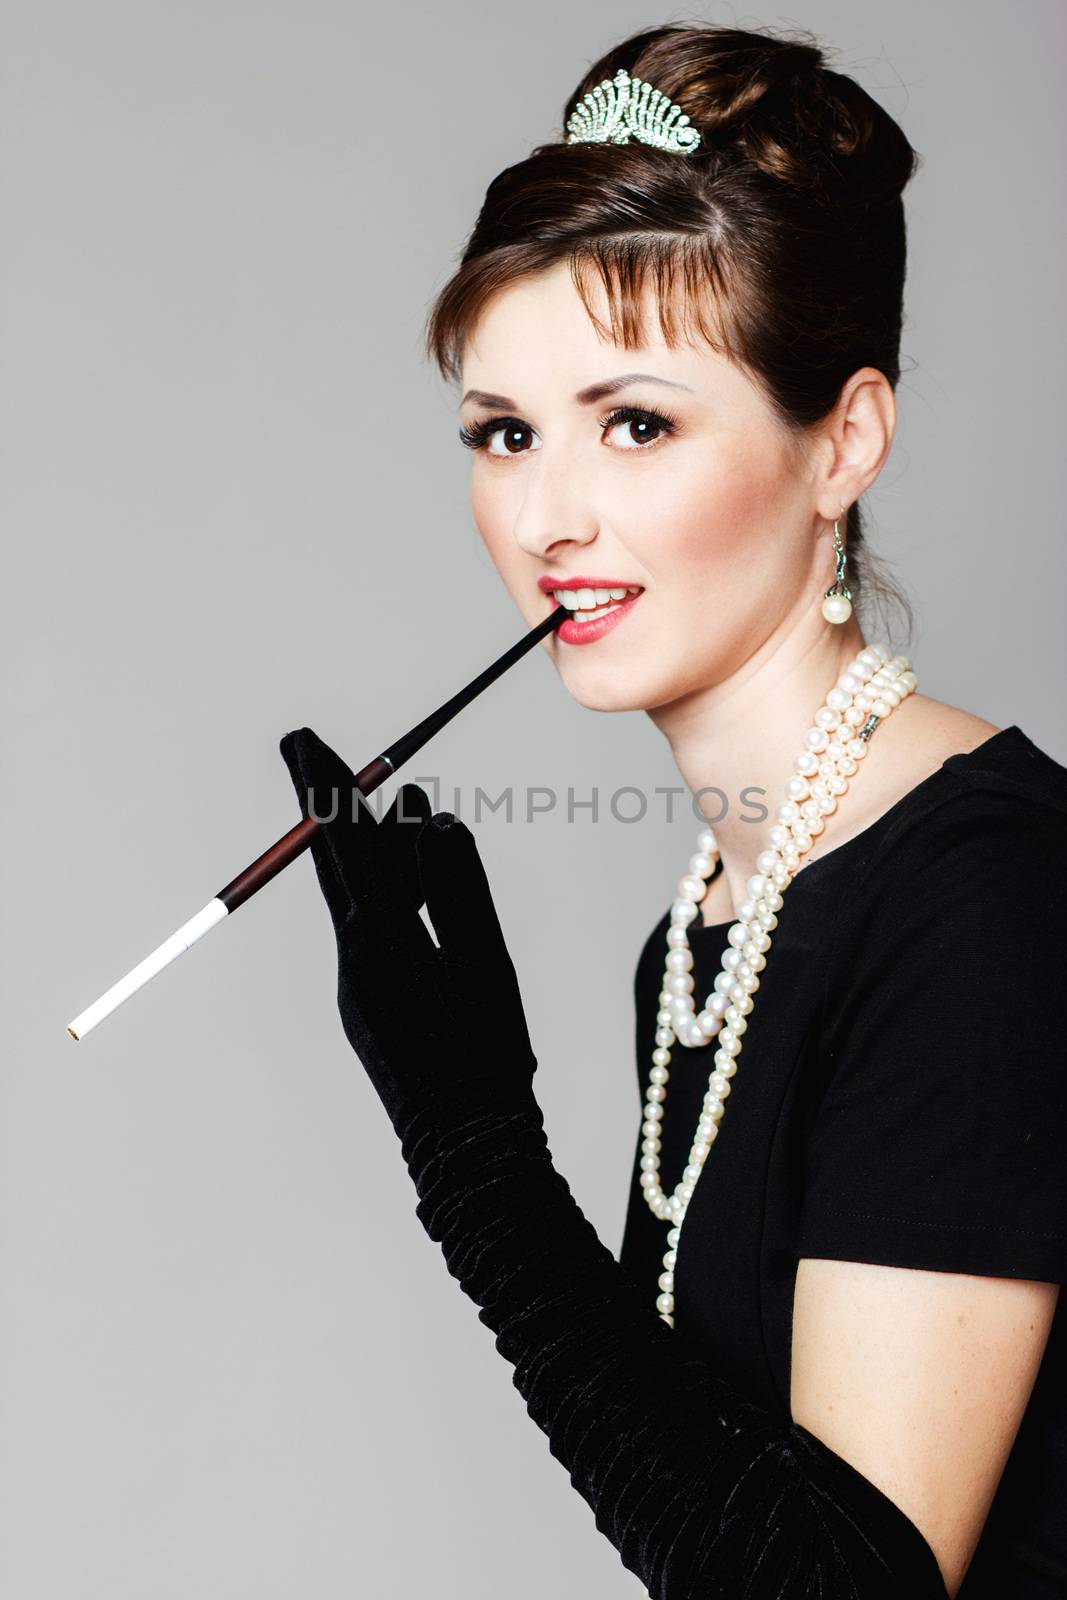 Portrait of a beautiful young woman in retro style with cigarette in mouthpiece in the image of the famous actress Audrey Hepburn